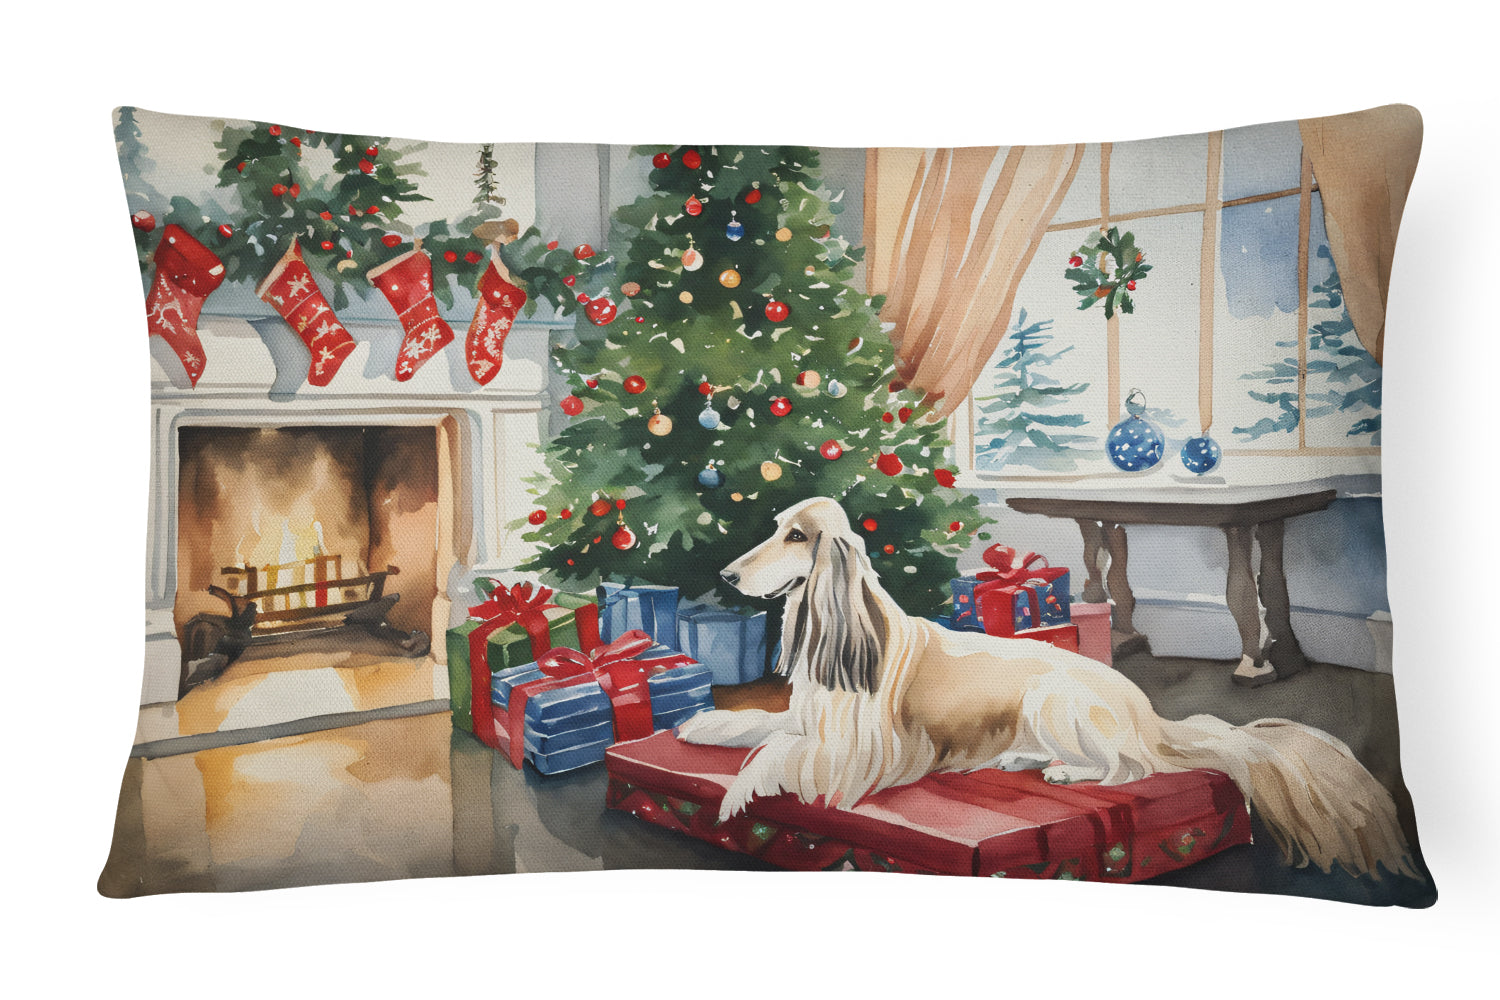 Buy this Afghan Hound Cozy Christmas Throw Pillow